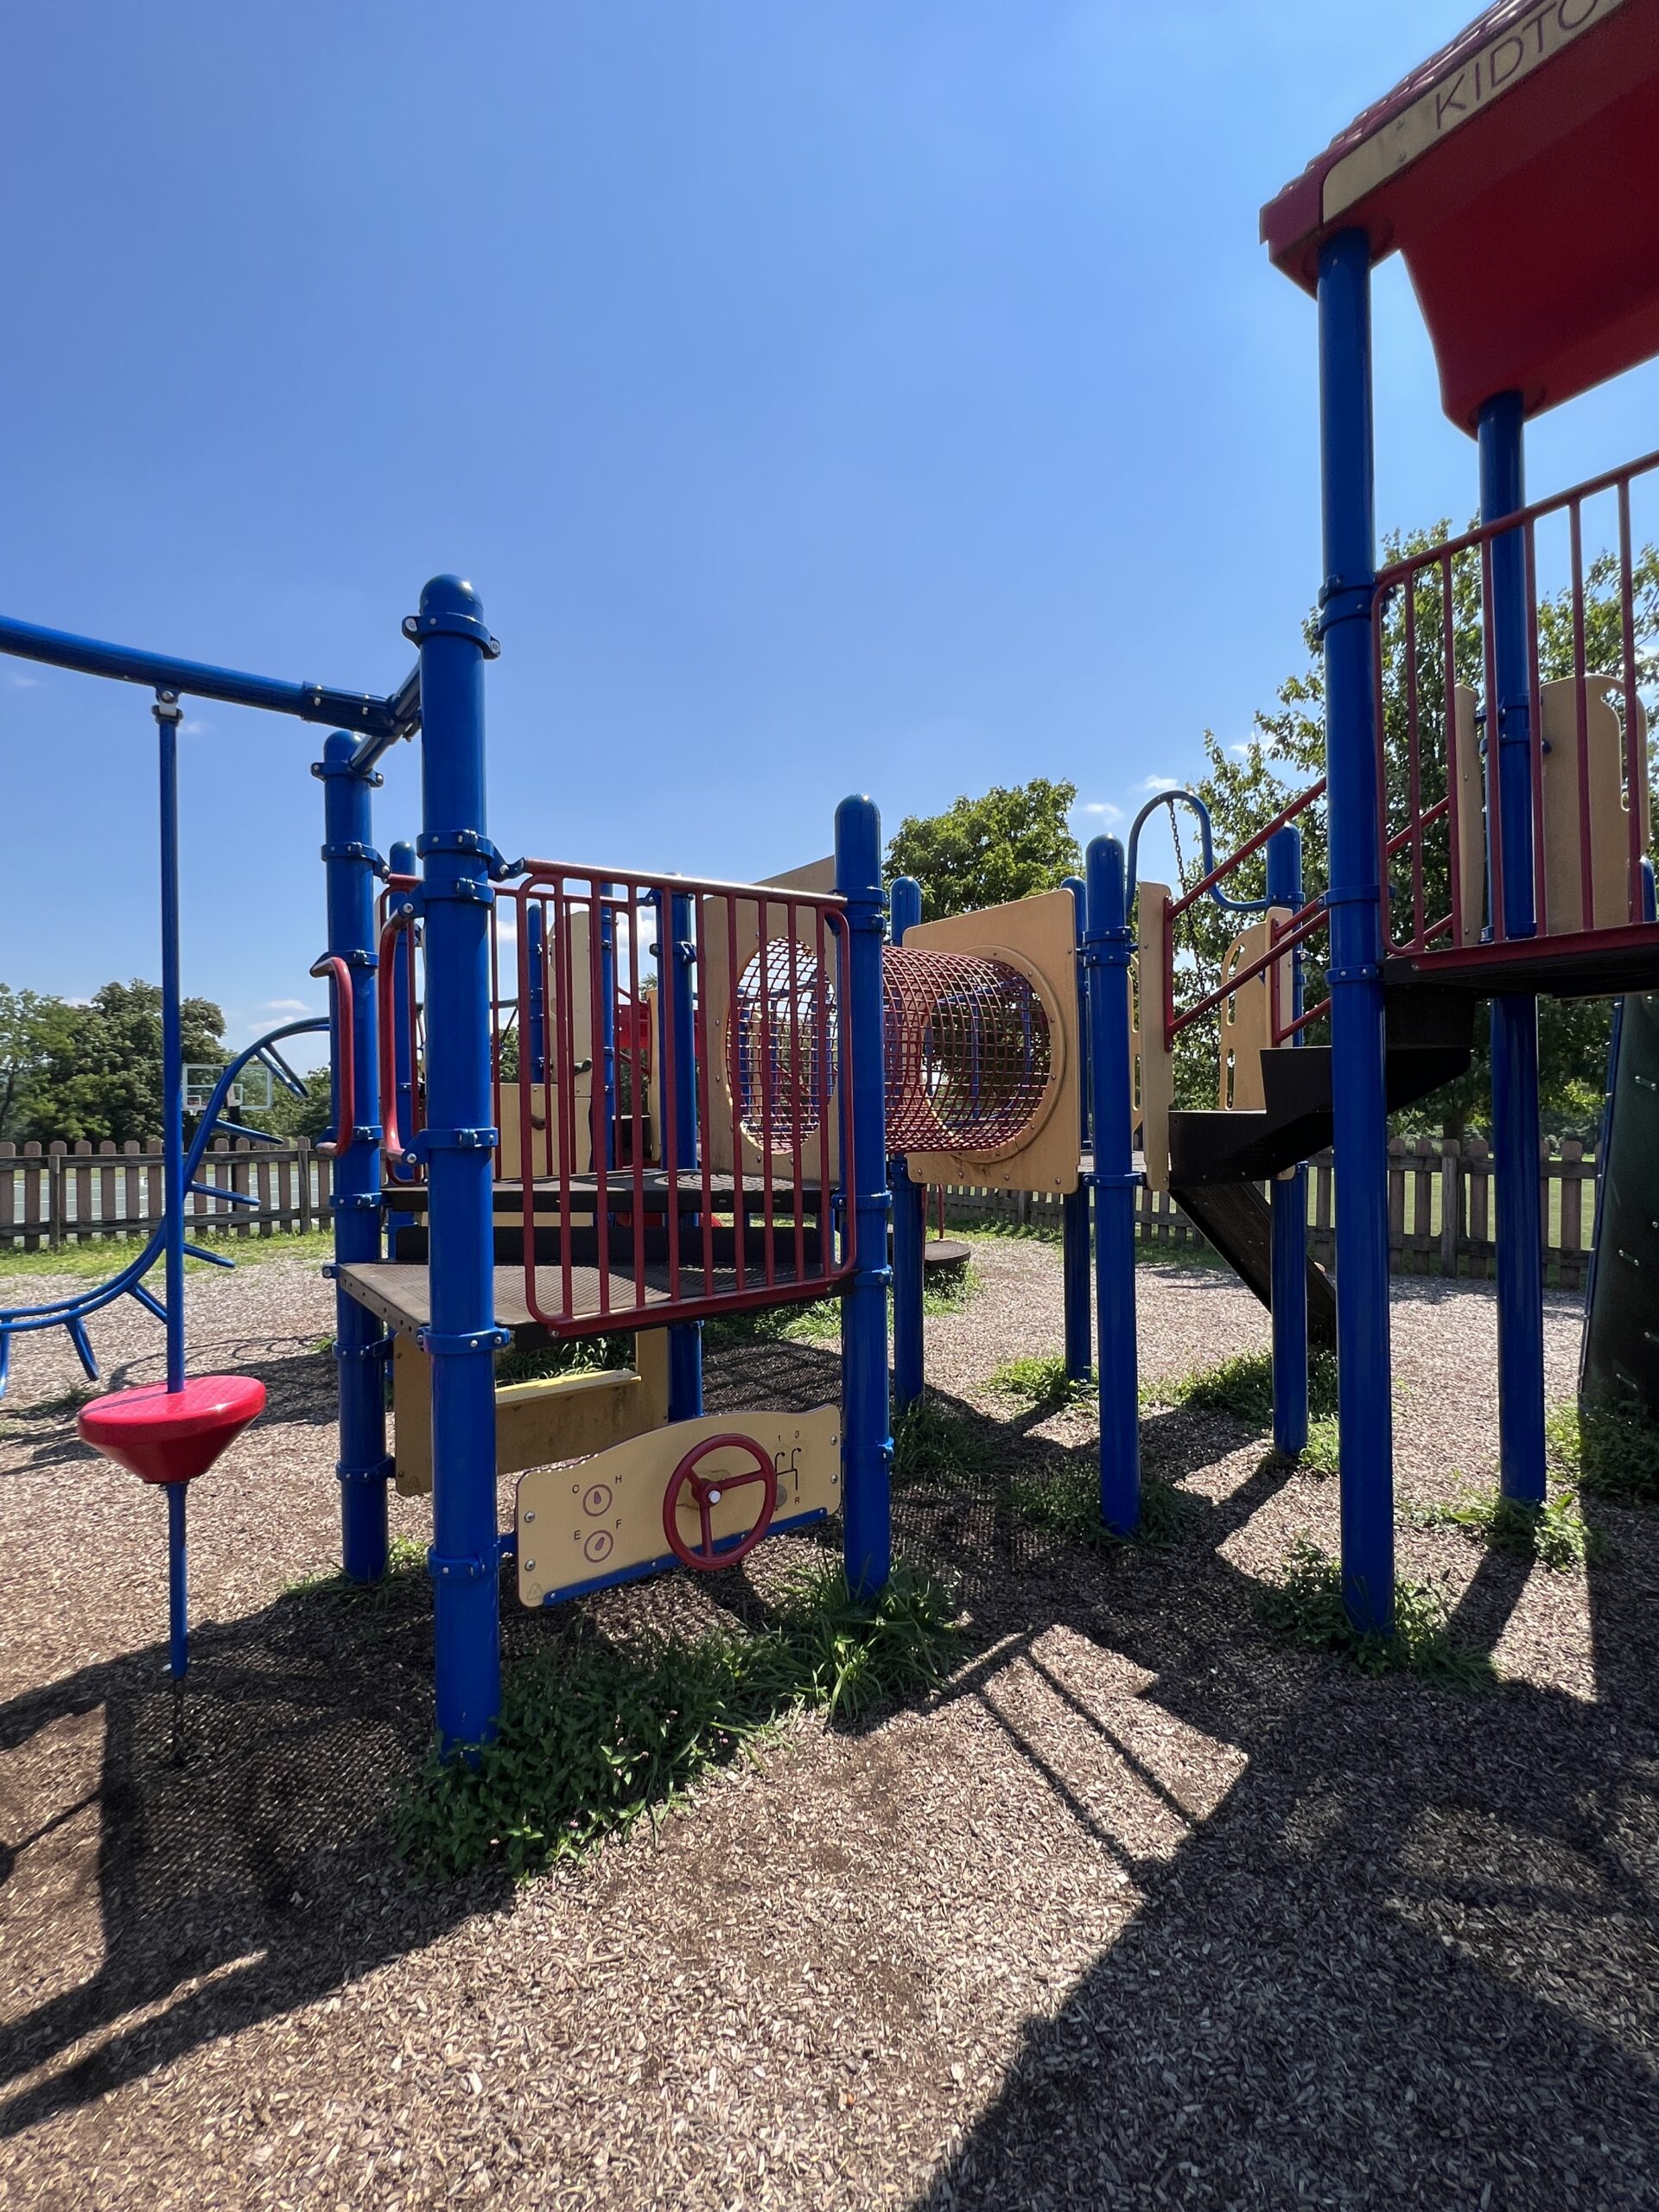 Alexandria Township Park Playground in Milford NJ - Features - tunnel and ground level sensory play